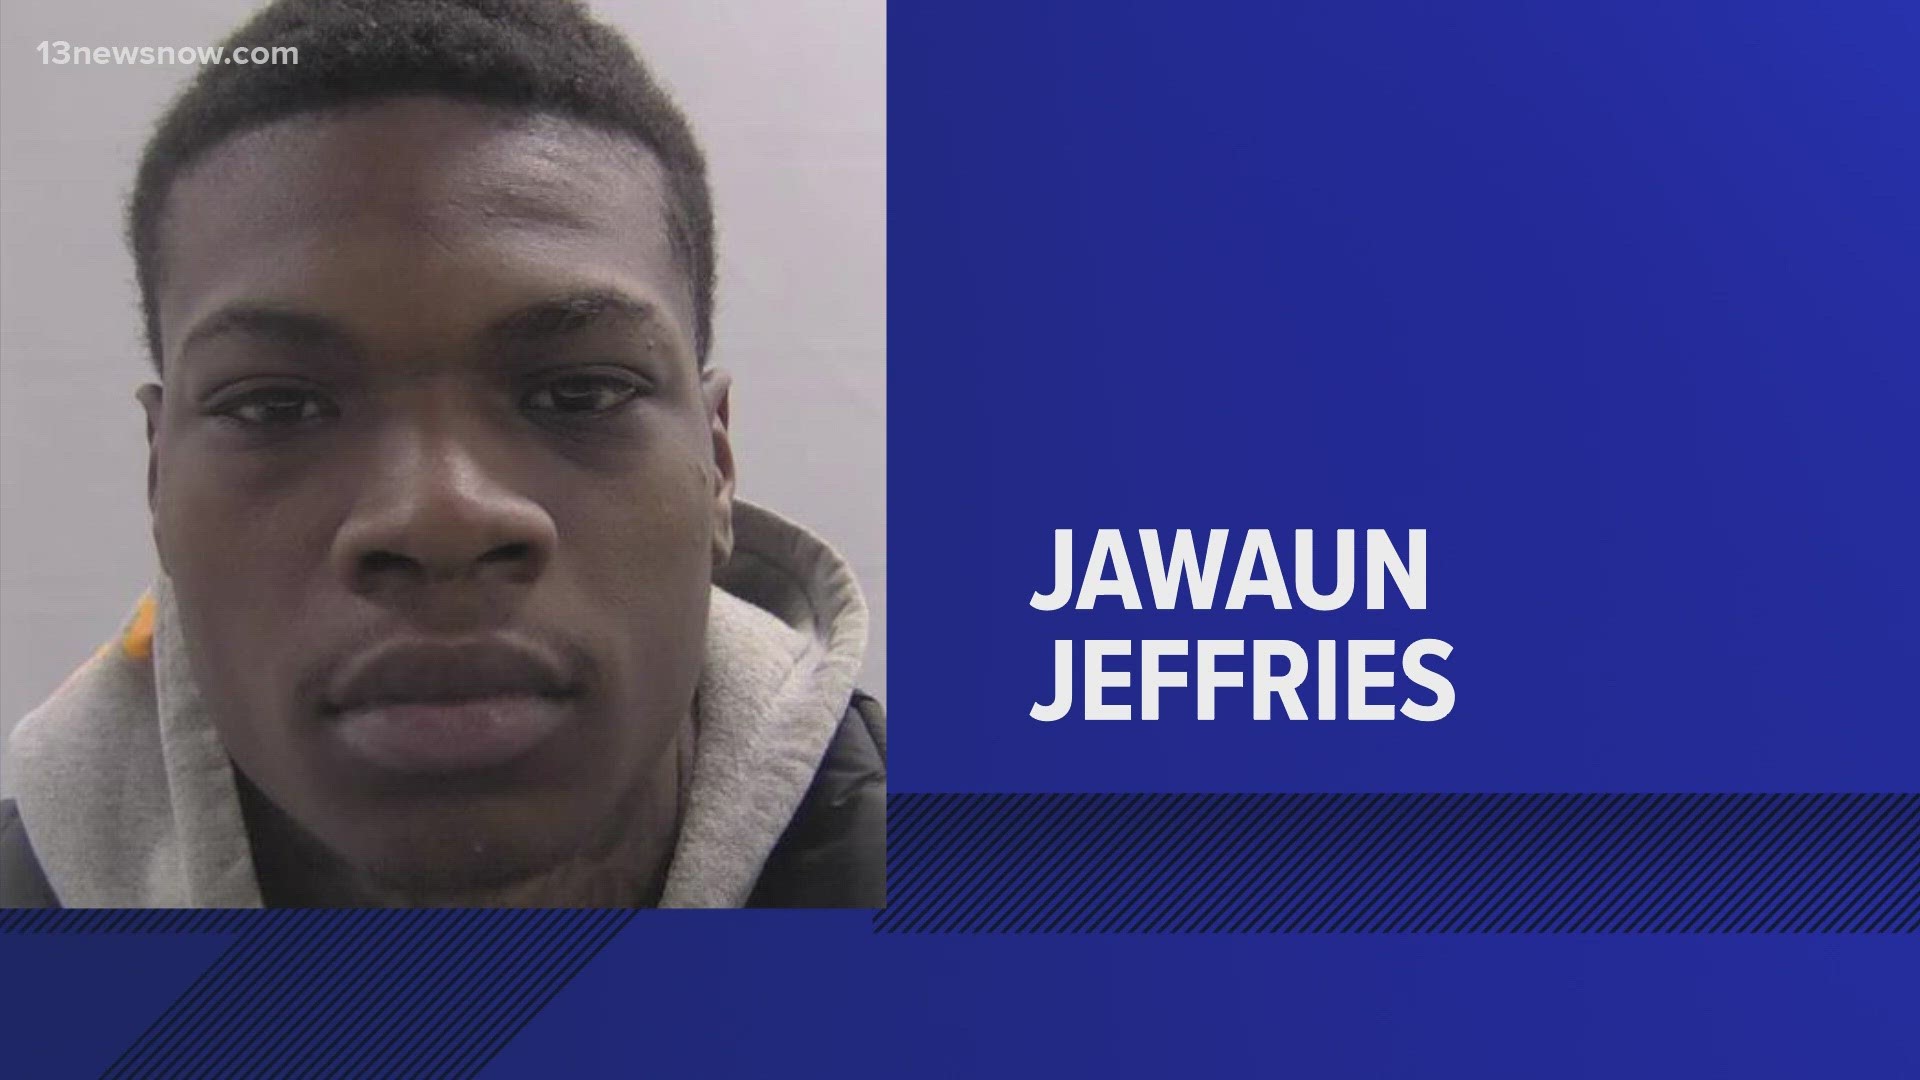 21-year-old Jawaun Jeffries faces several charges including aggravated malicious wounding.